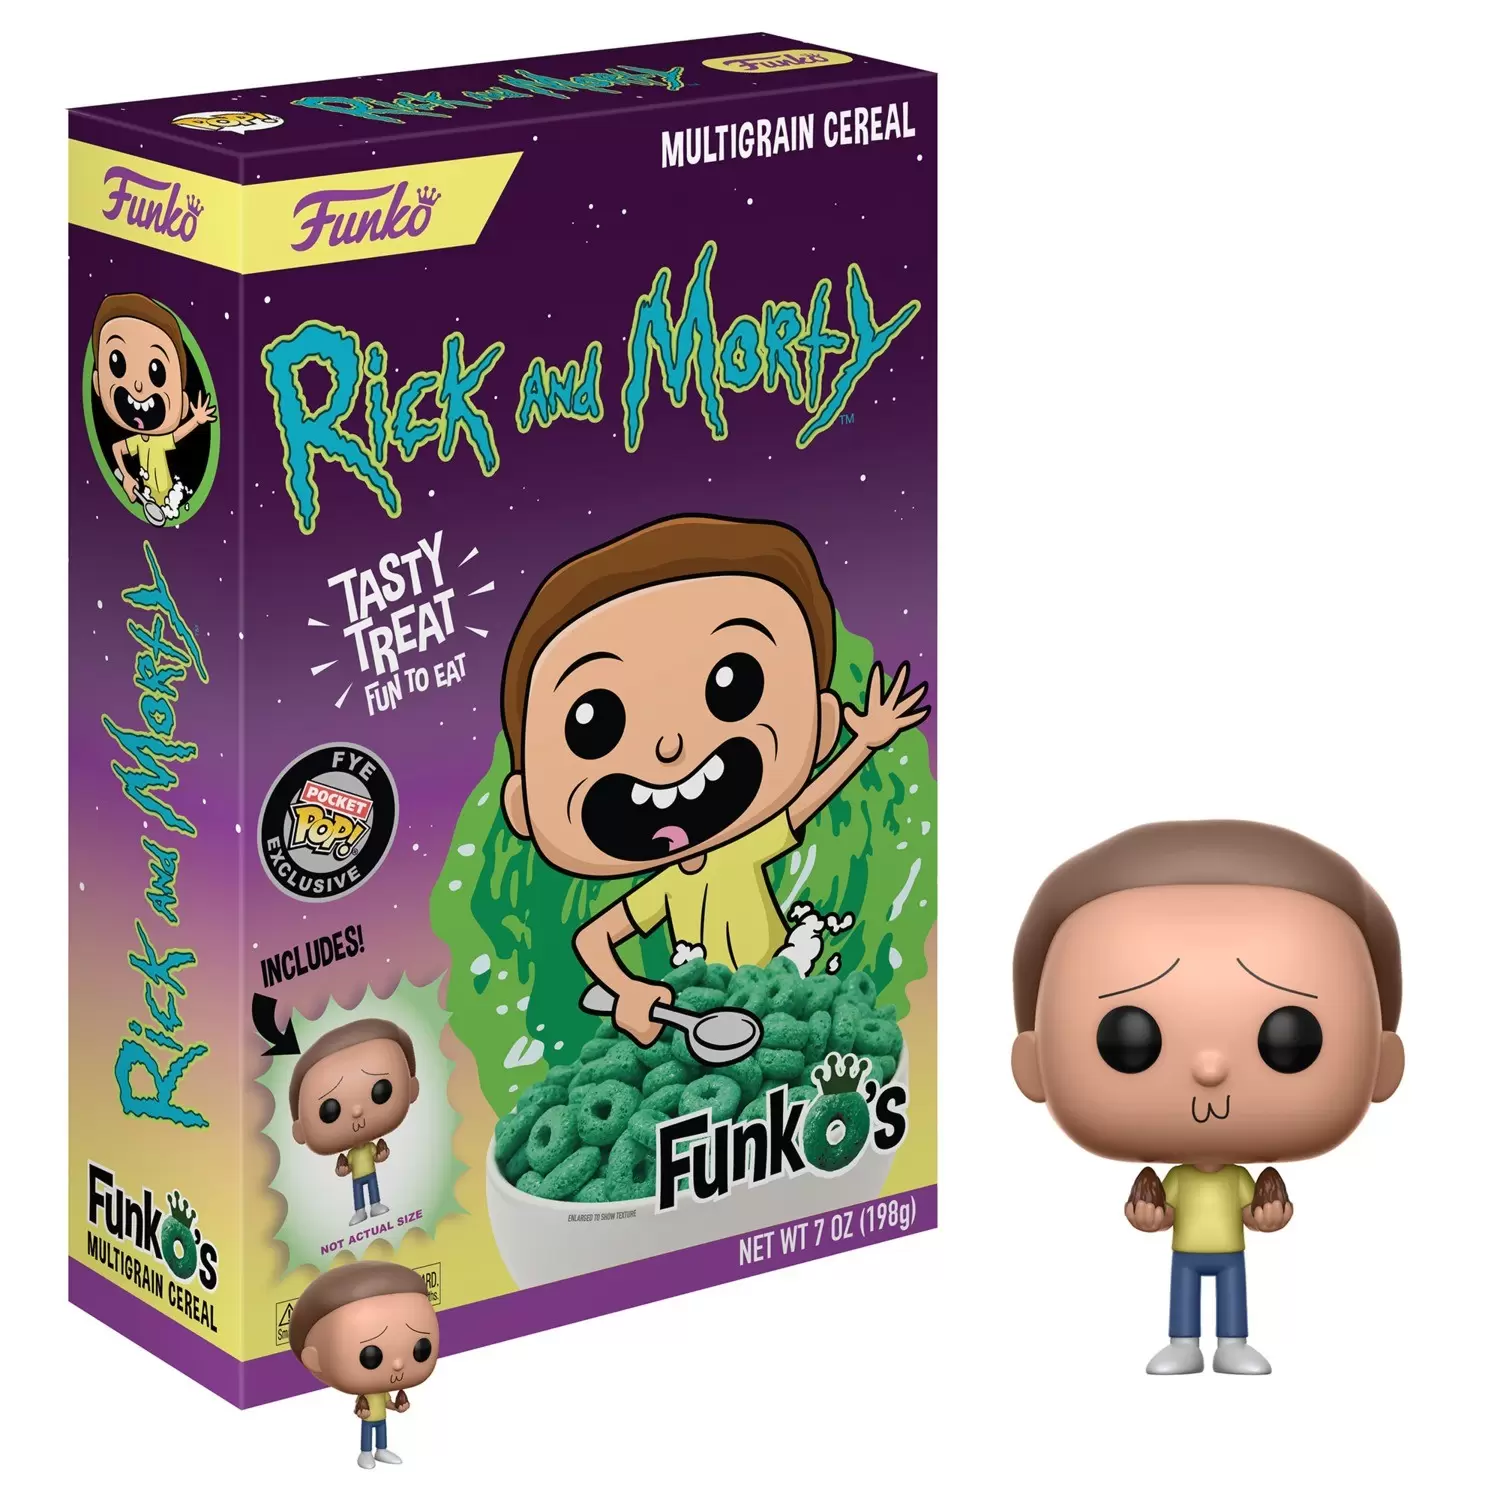 Pocket Pop! and Pop Minis! - Rick and Morty - Morty